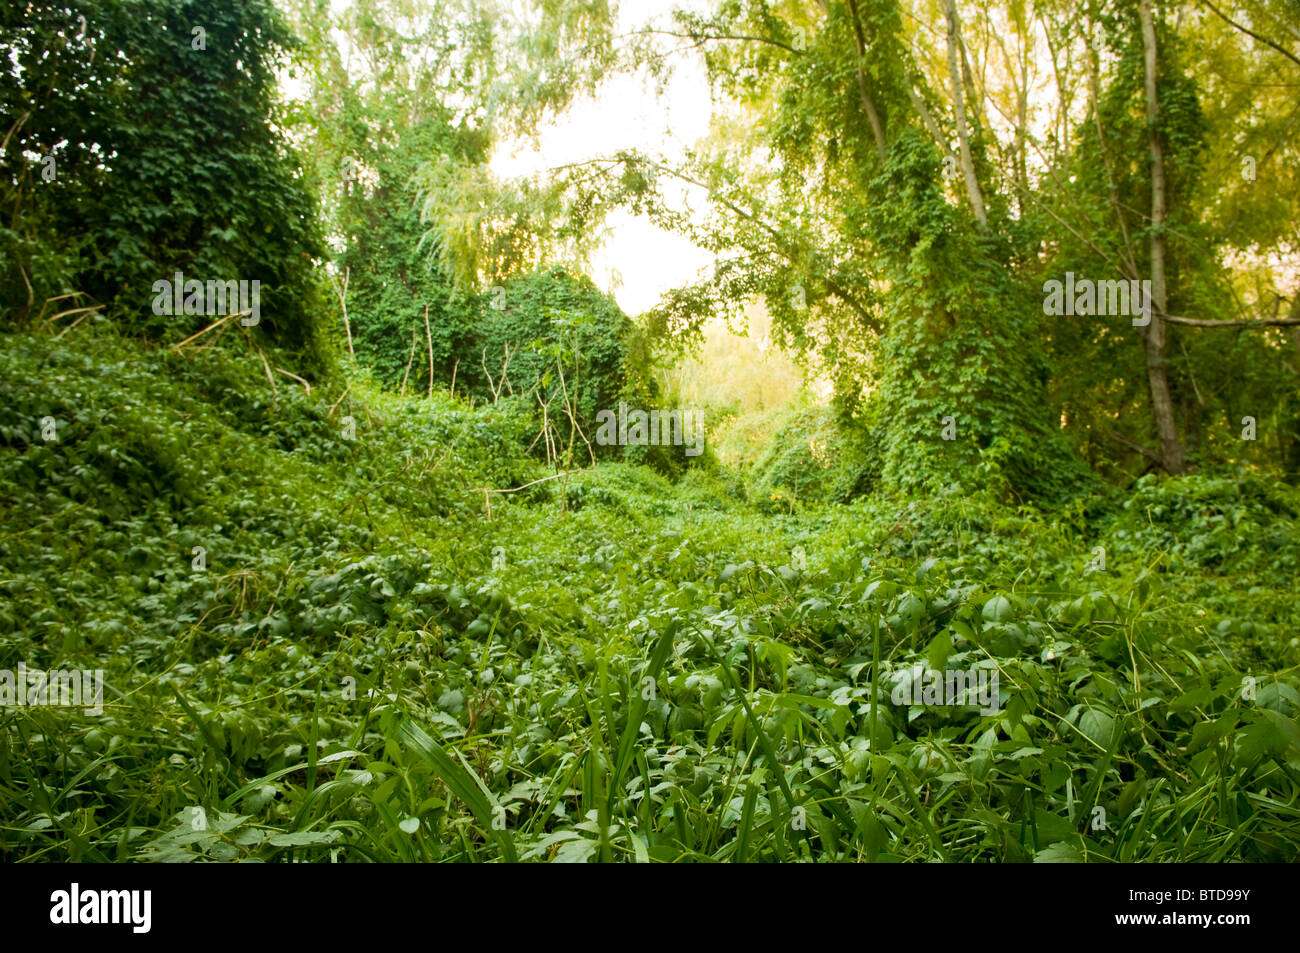 Lush green creeping plant takes over and makes a thick, vibrant jungle Stock Photo